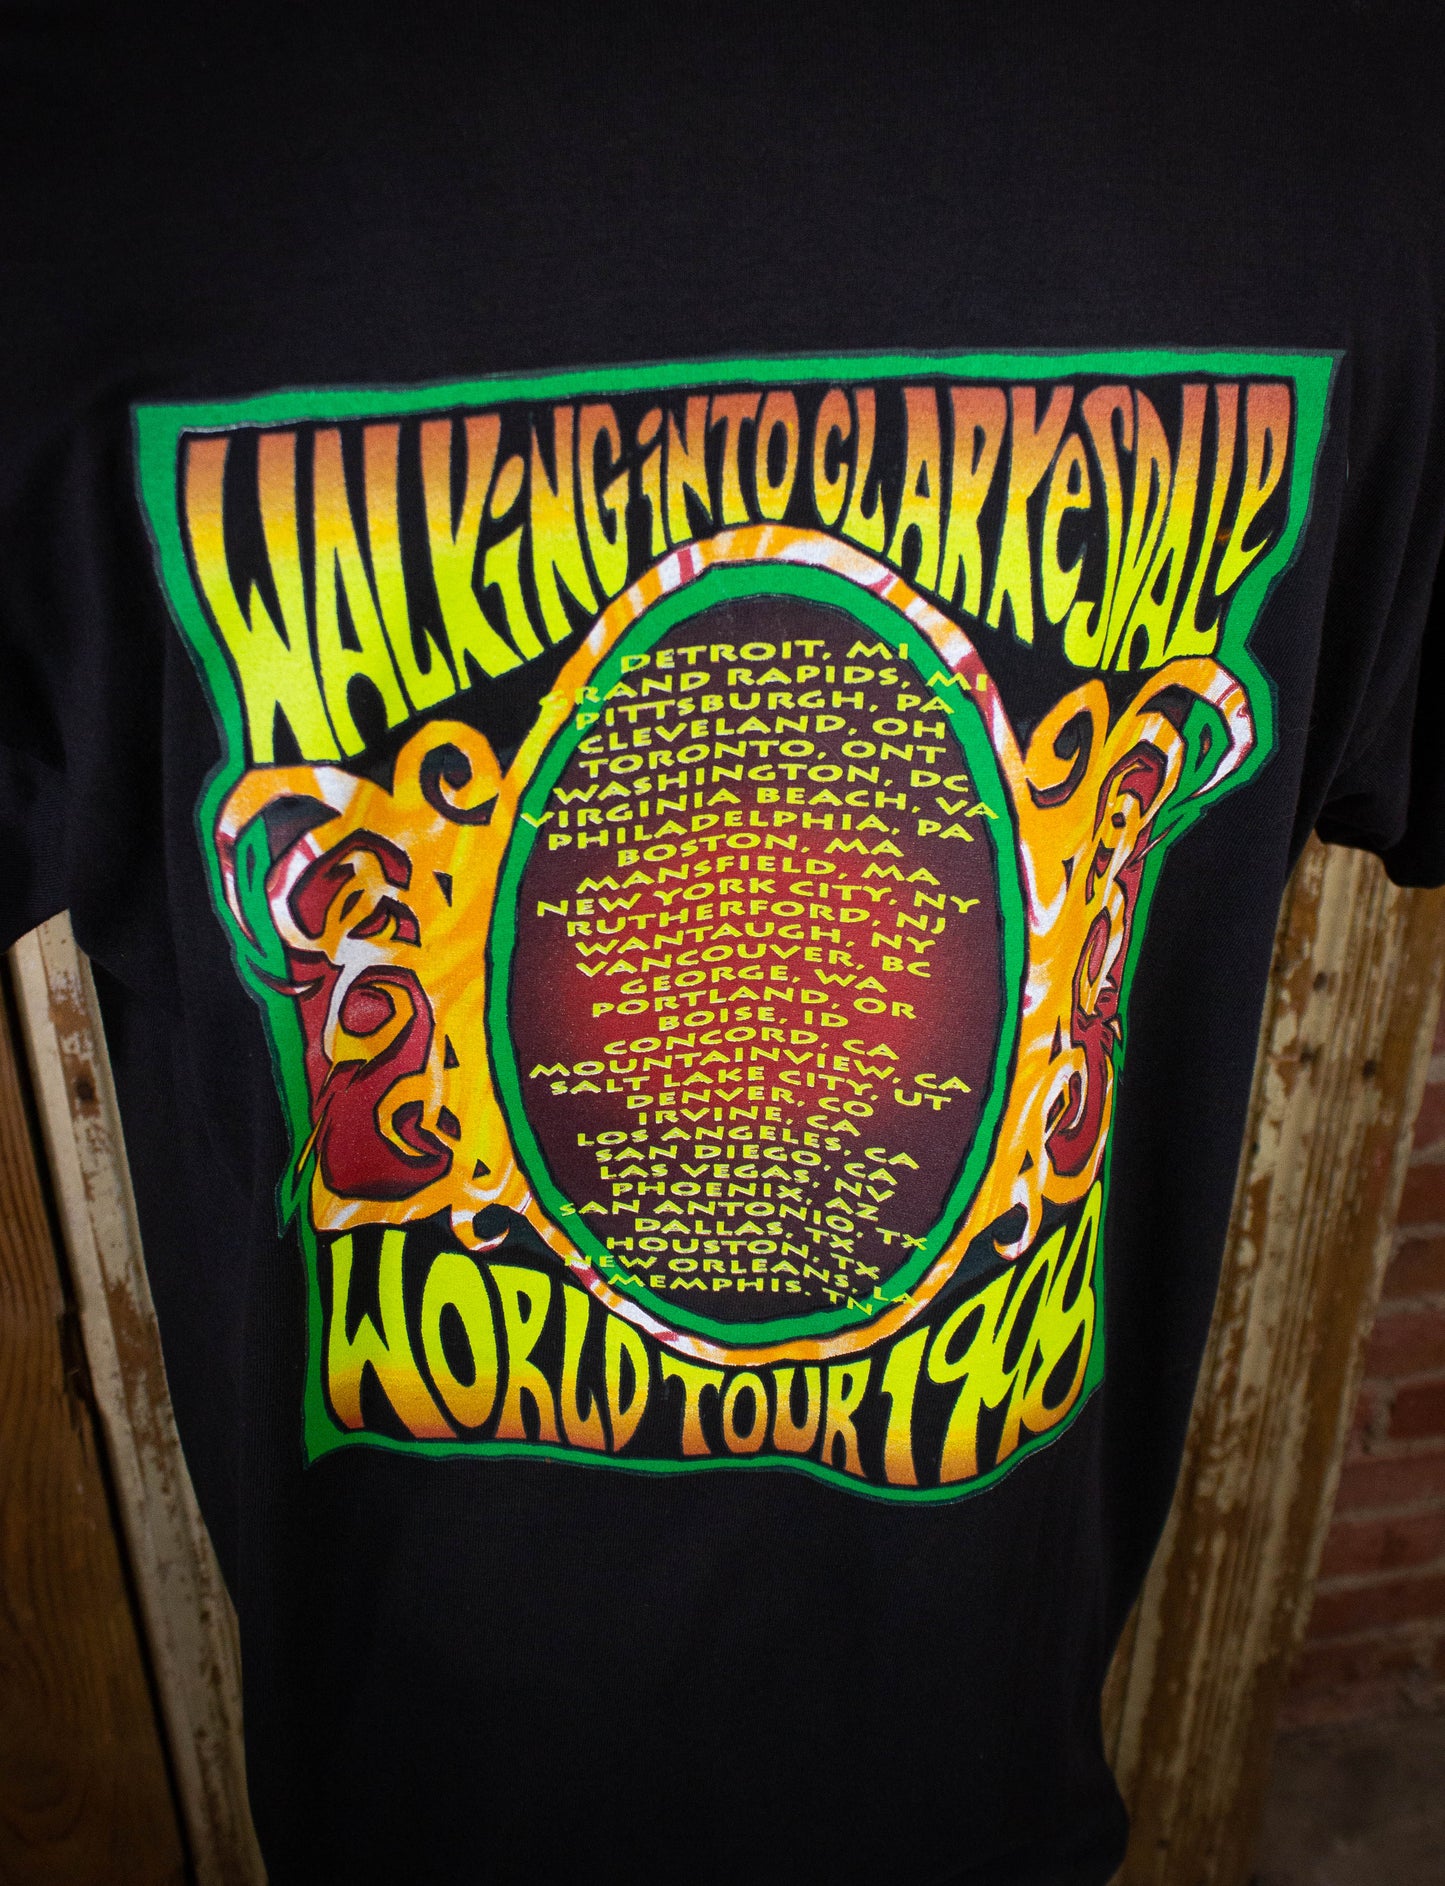 Vintage Page and Plant Walking Into Clarksdale Concert T Shirt 1998 Black 2XL